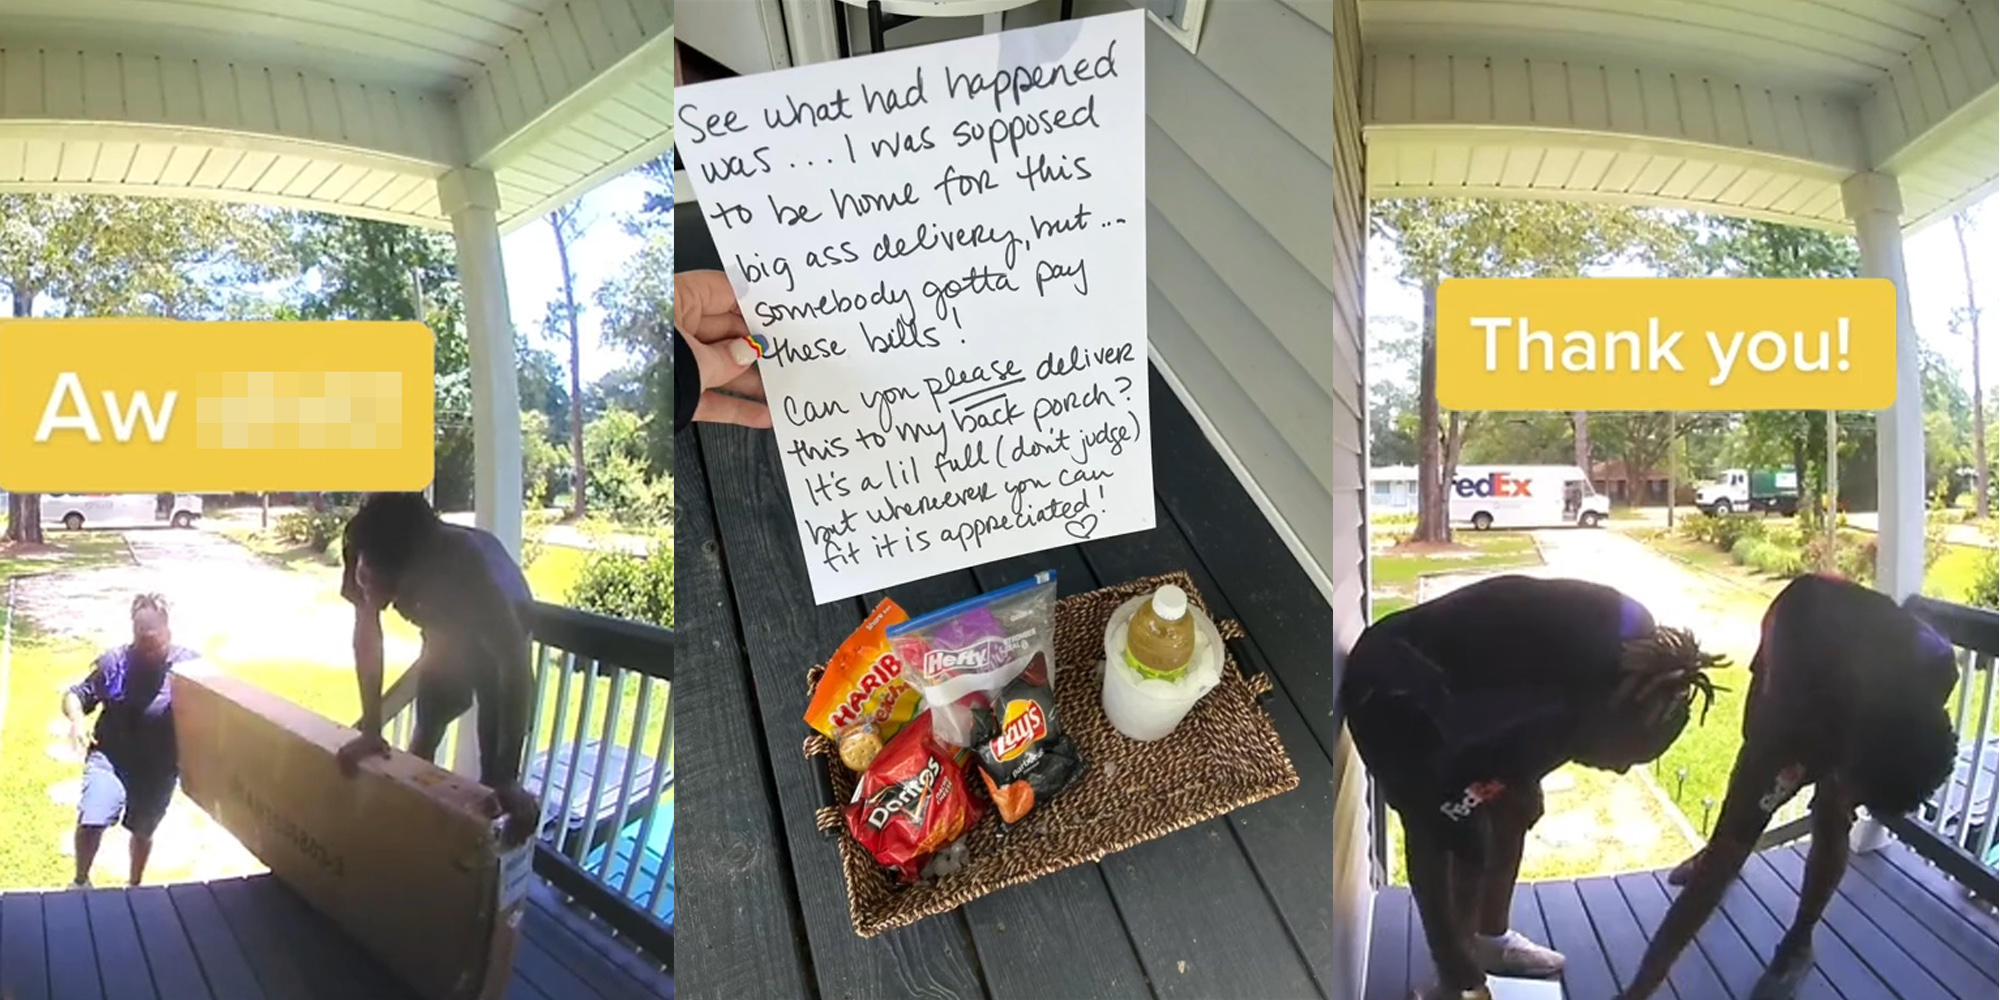 FedEx Workers Bribed With Snacks to Deliver Package to Back Porch